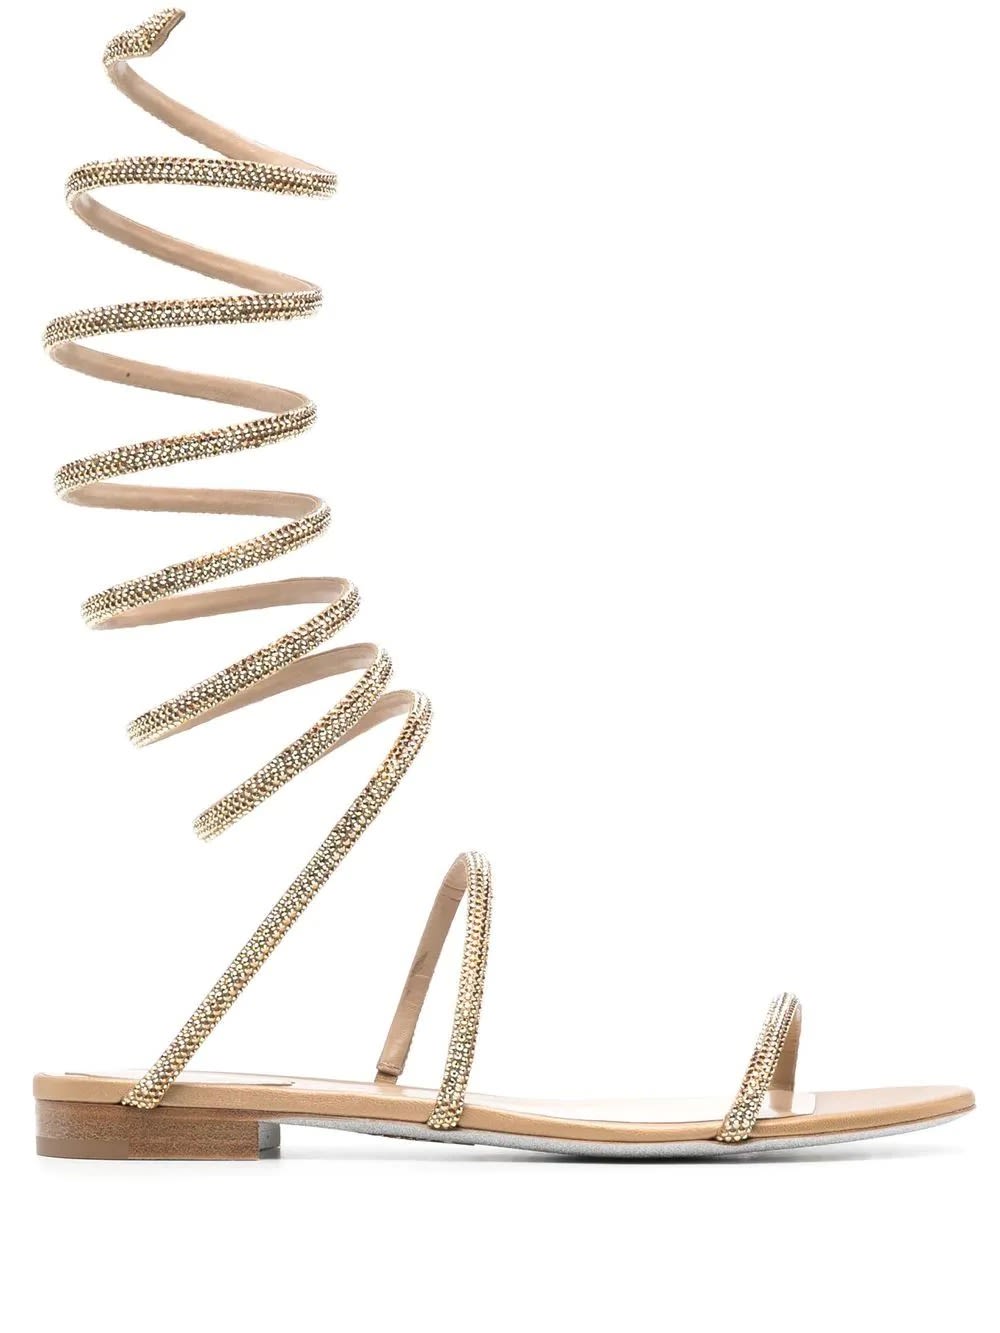 RENÉ CAOVILLA GOLD SUPERCLEO LOW SANDAL WITH CRYSTALS